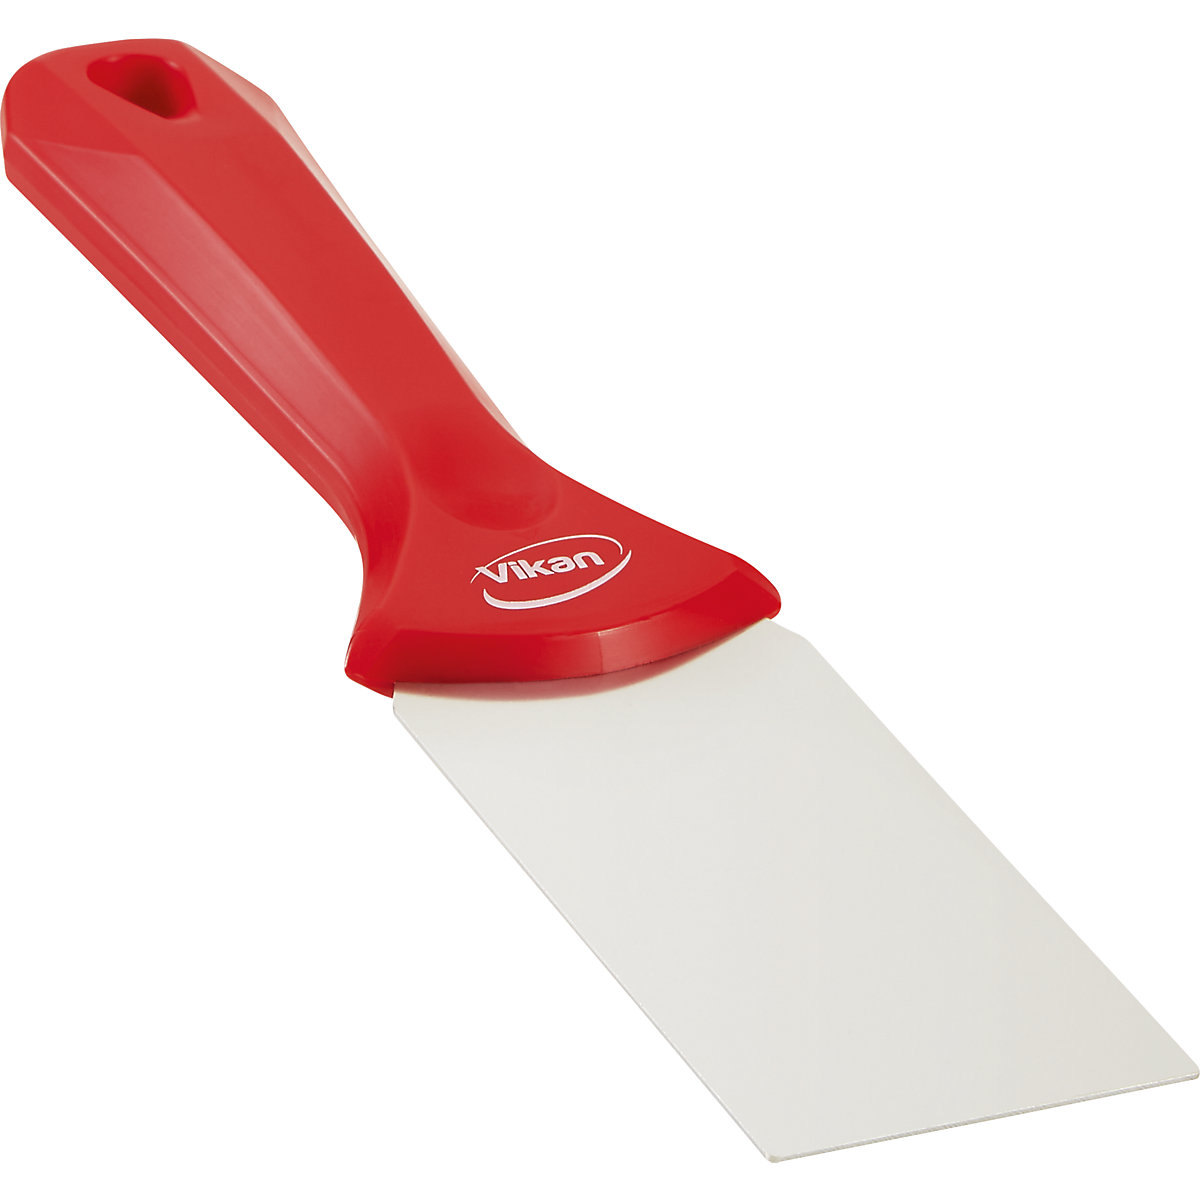 Hand scraper with stainless steel blade – Vikan, width 50 mm, pack of 10, red-7